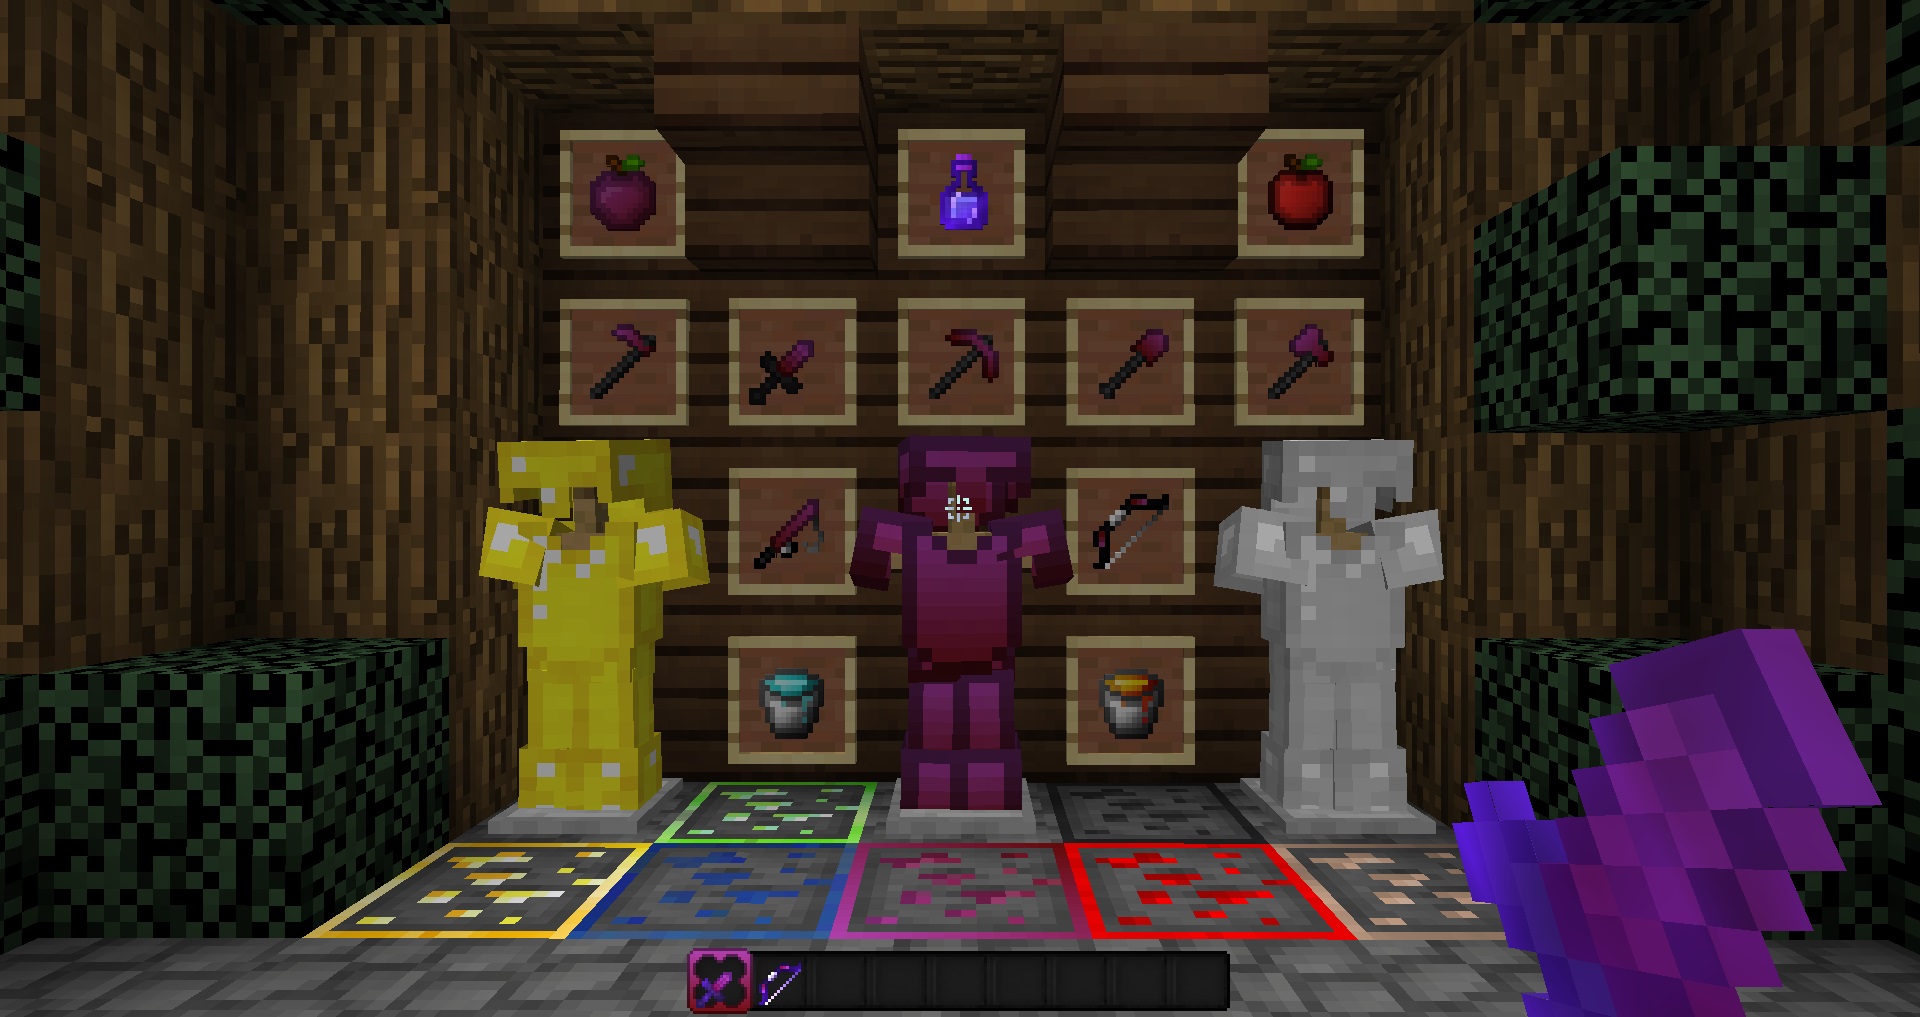 Minecraft pvp texture pack: Colb's Dragonfruit - A player holds a very small purple sword while looking at ore blocks with colorful outlines and three sets of armor